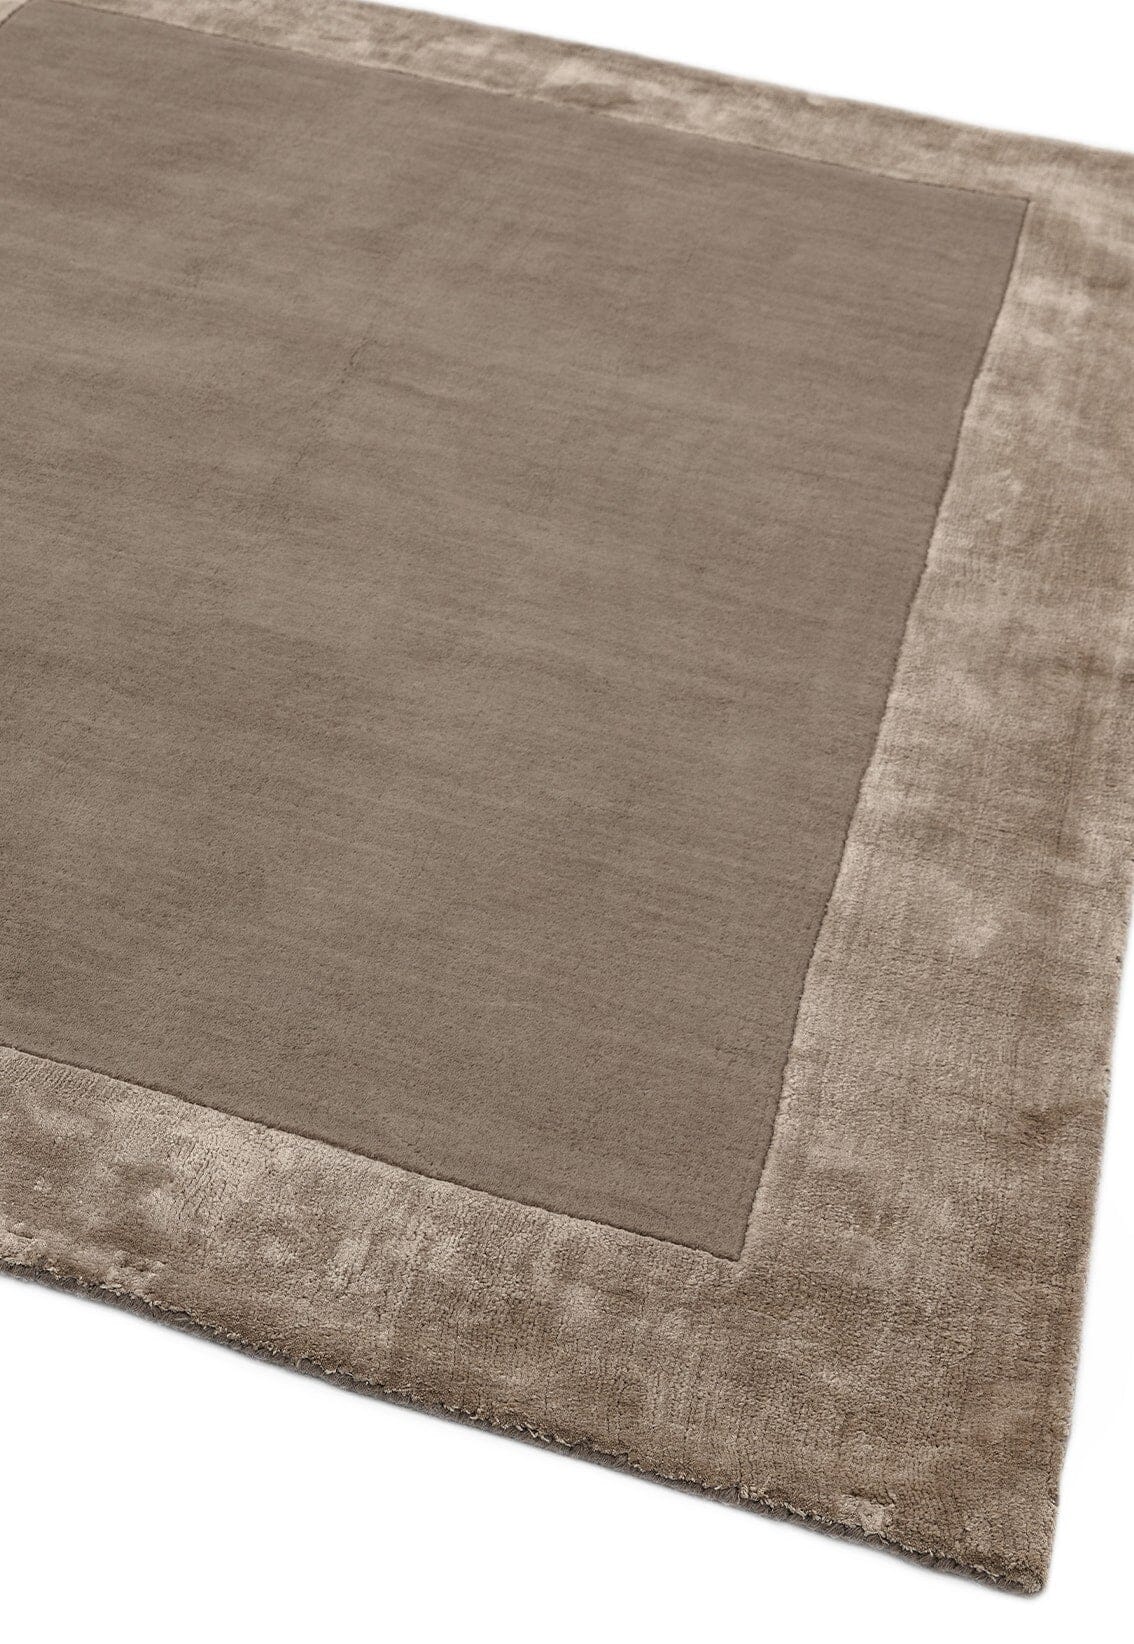 Asiatic Carpets Ascot Hand Woven Rug Taupe - 200 x 290cm